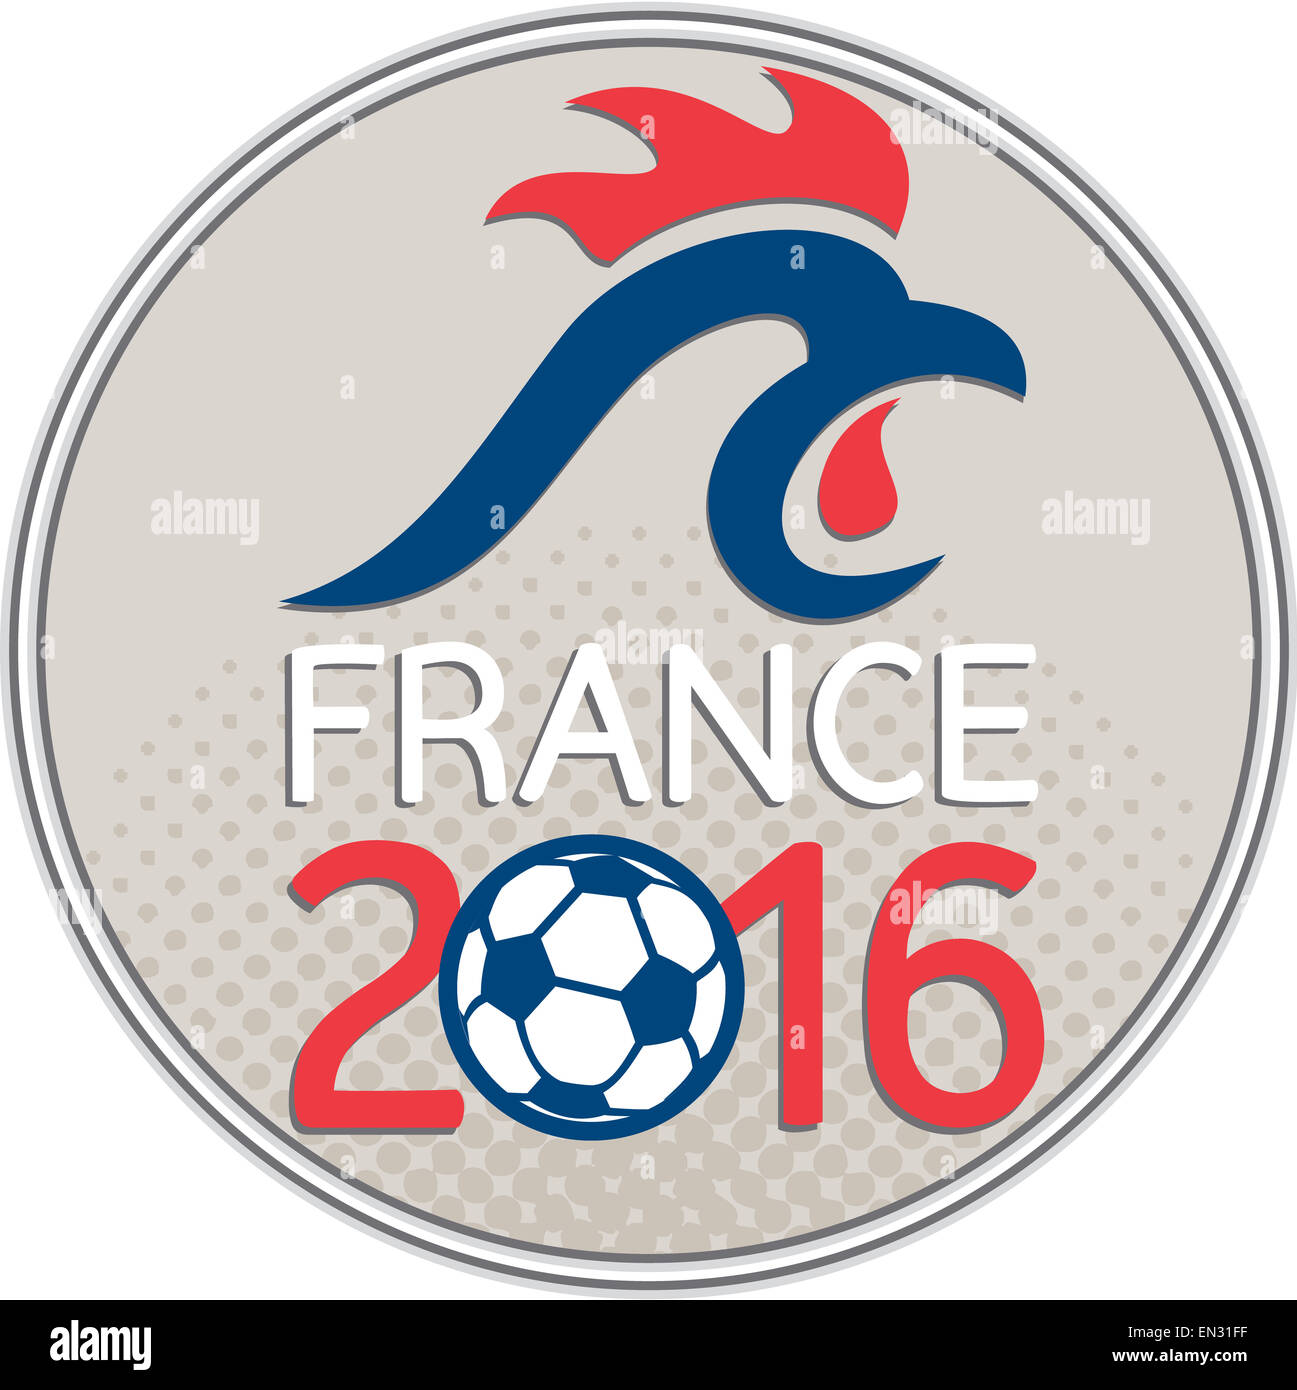 Illustration of a French rooster cockerel and soccer football ball set inside circle with half-tone dots with words France 2016 Stock Photo